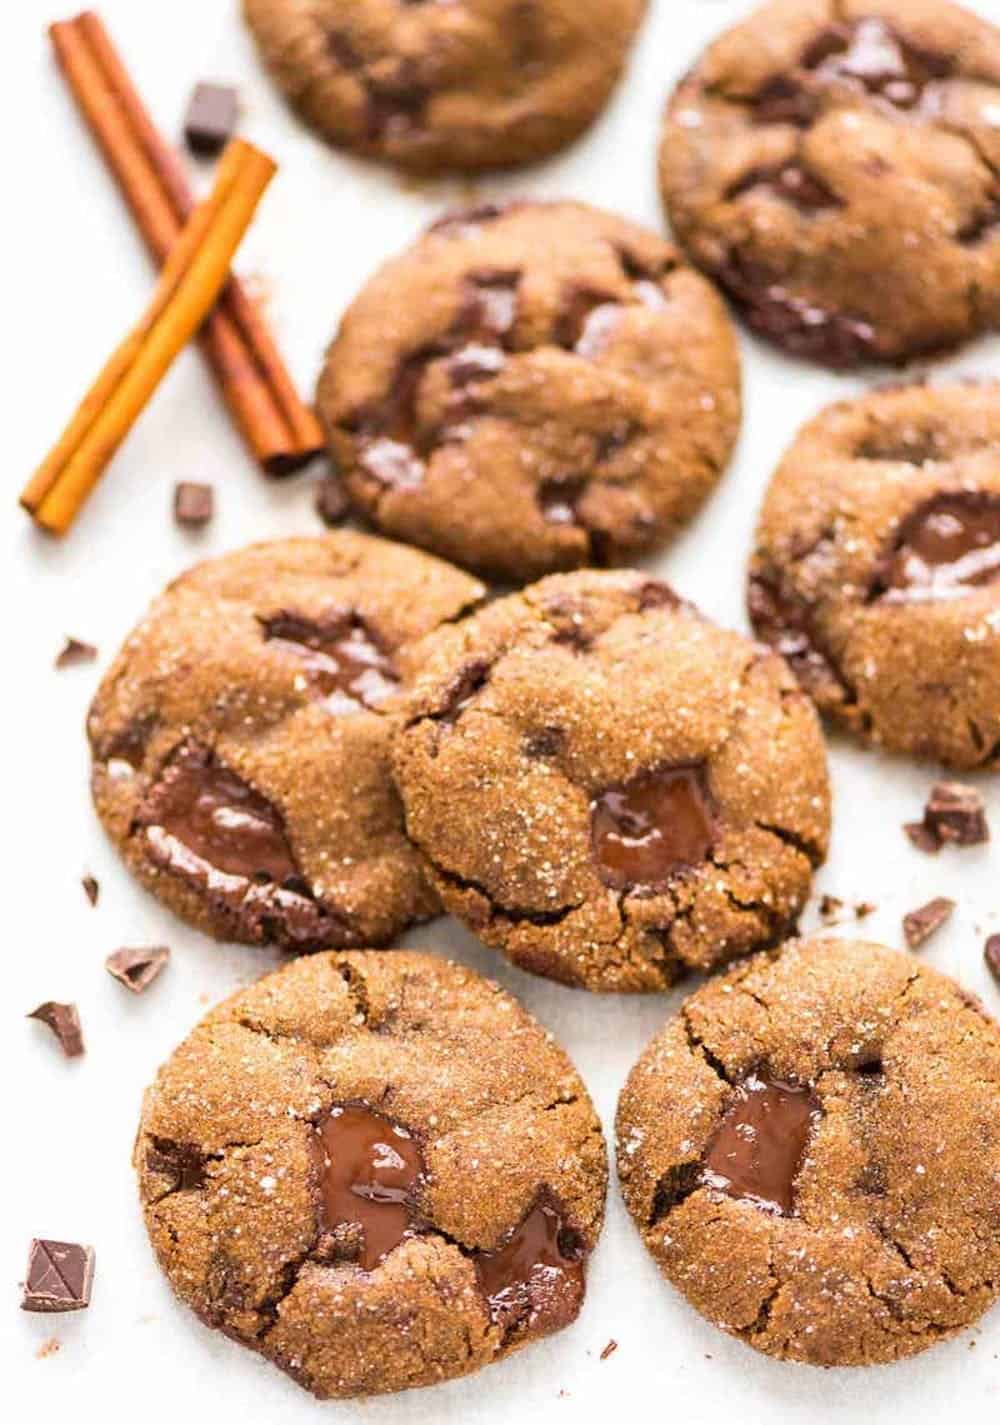 Ginger molasses cookies with chocolate